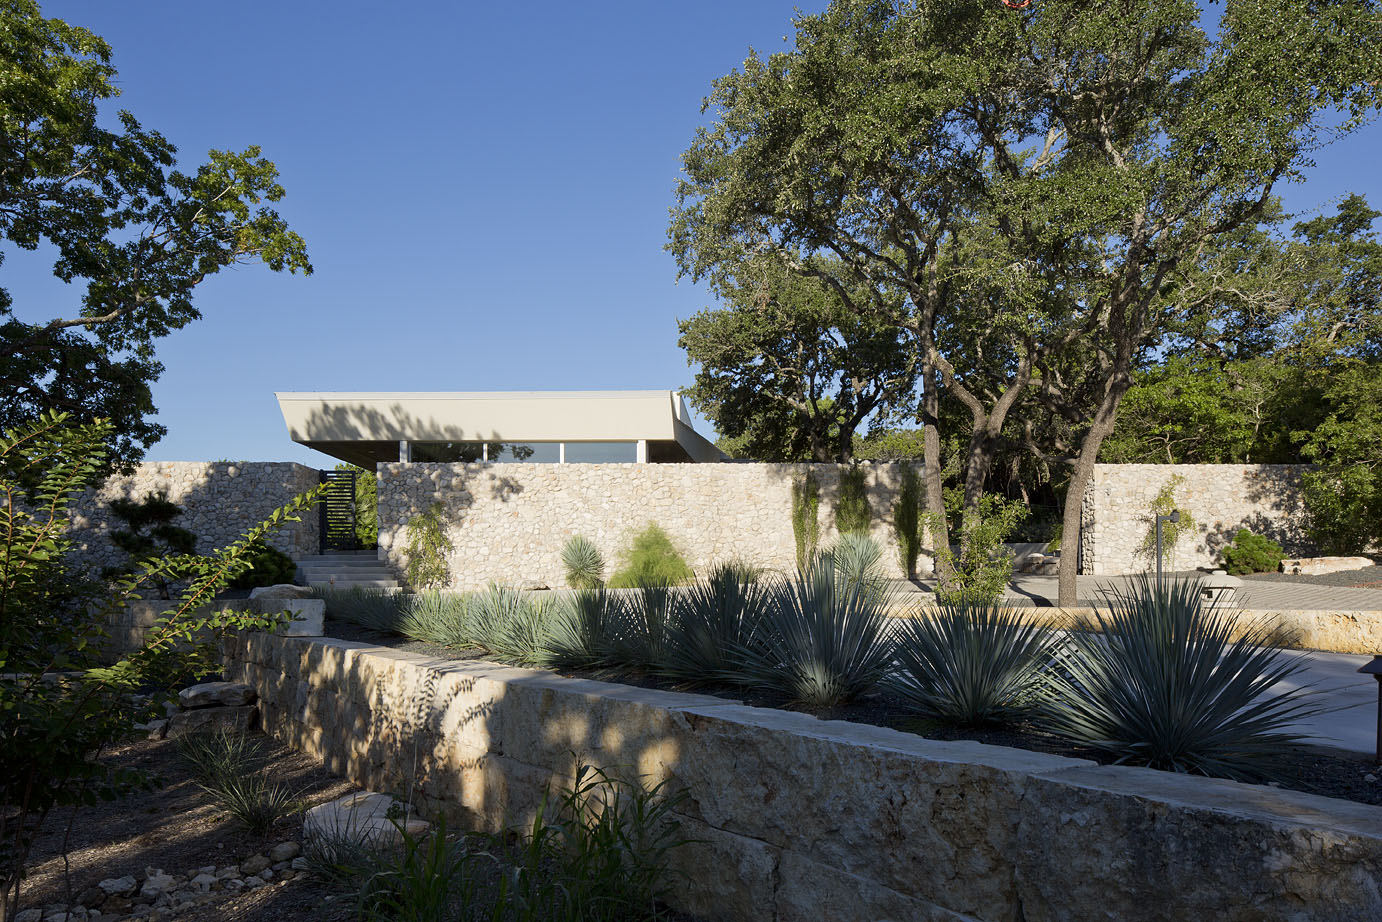 Locally sourced limestone block and stone provide structure and privacy for this estate.